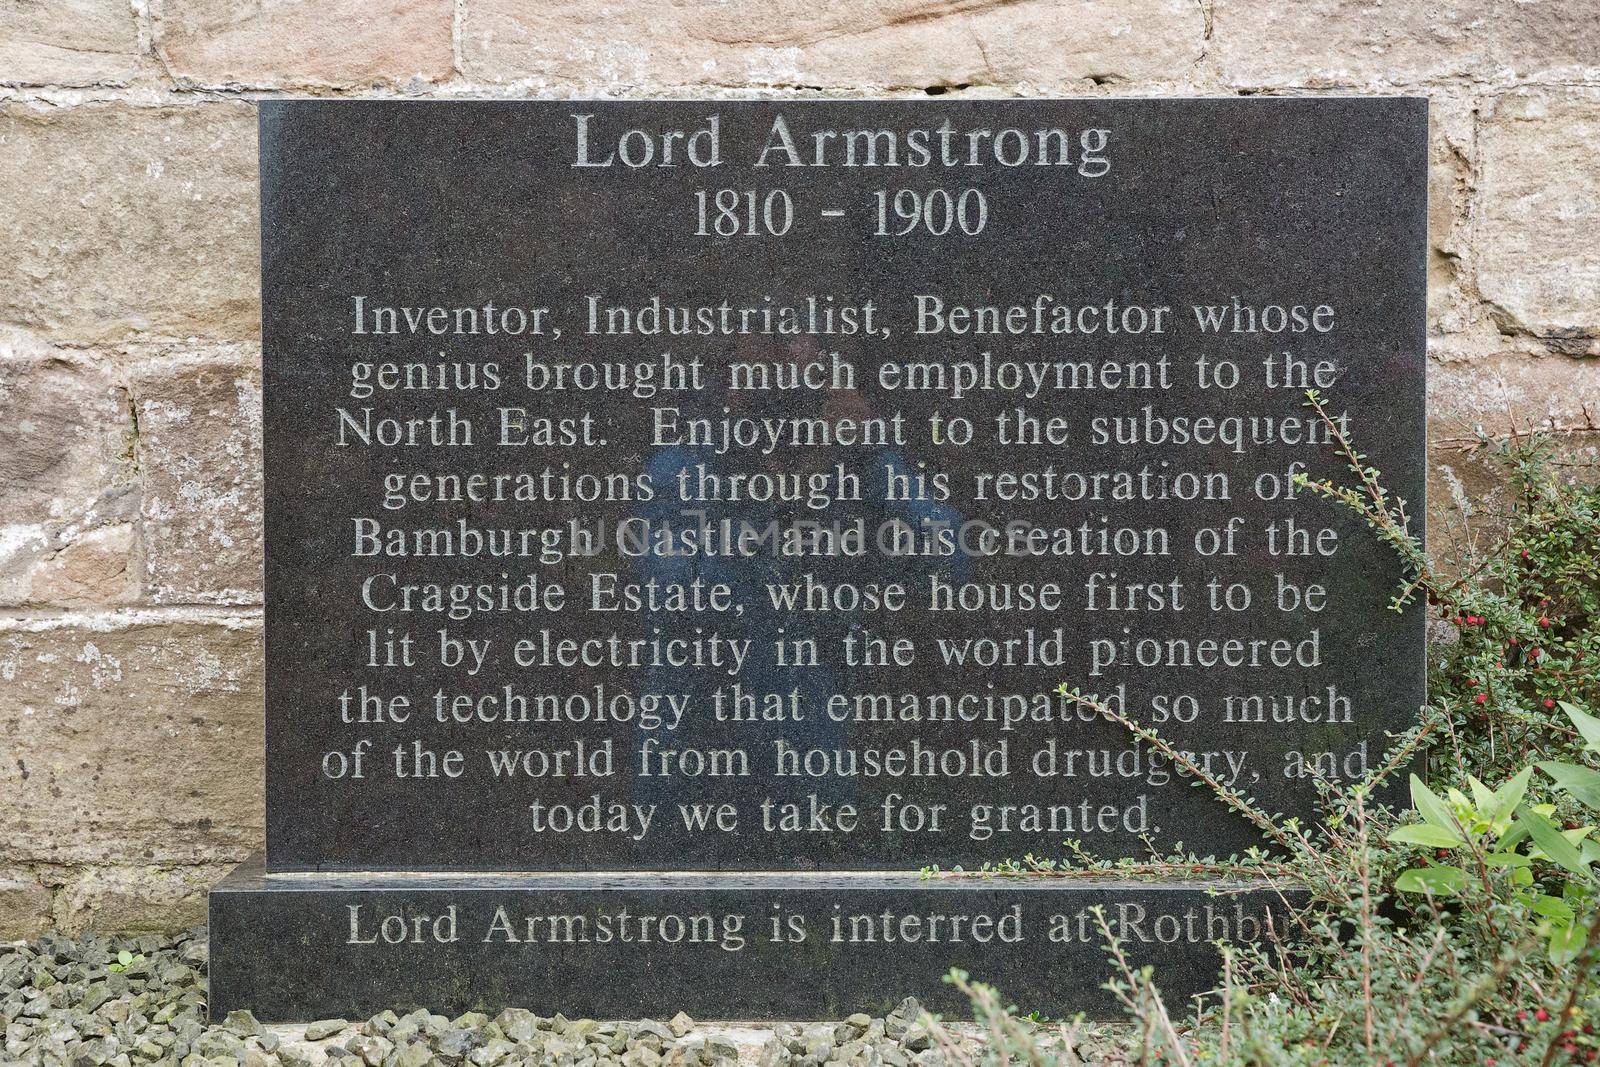 BAMBURGH, NORTHUMBERLAND, ENGLAND, UK - SEPTEMBER 10, 2017: Stone in memory for Lord Armstrong the first baron of Bamburgh Castle in Northumberland, England, UK.